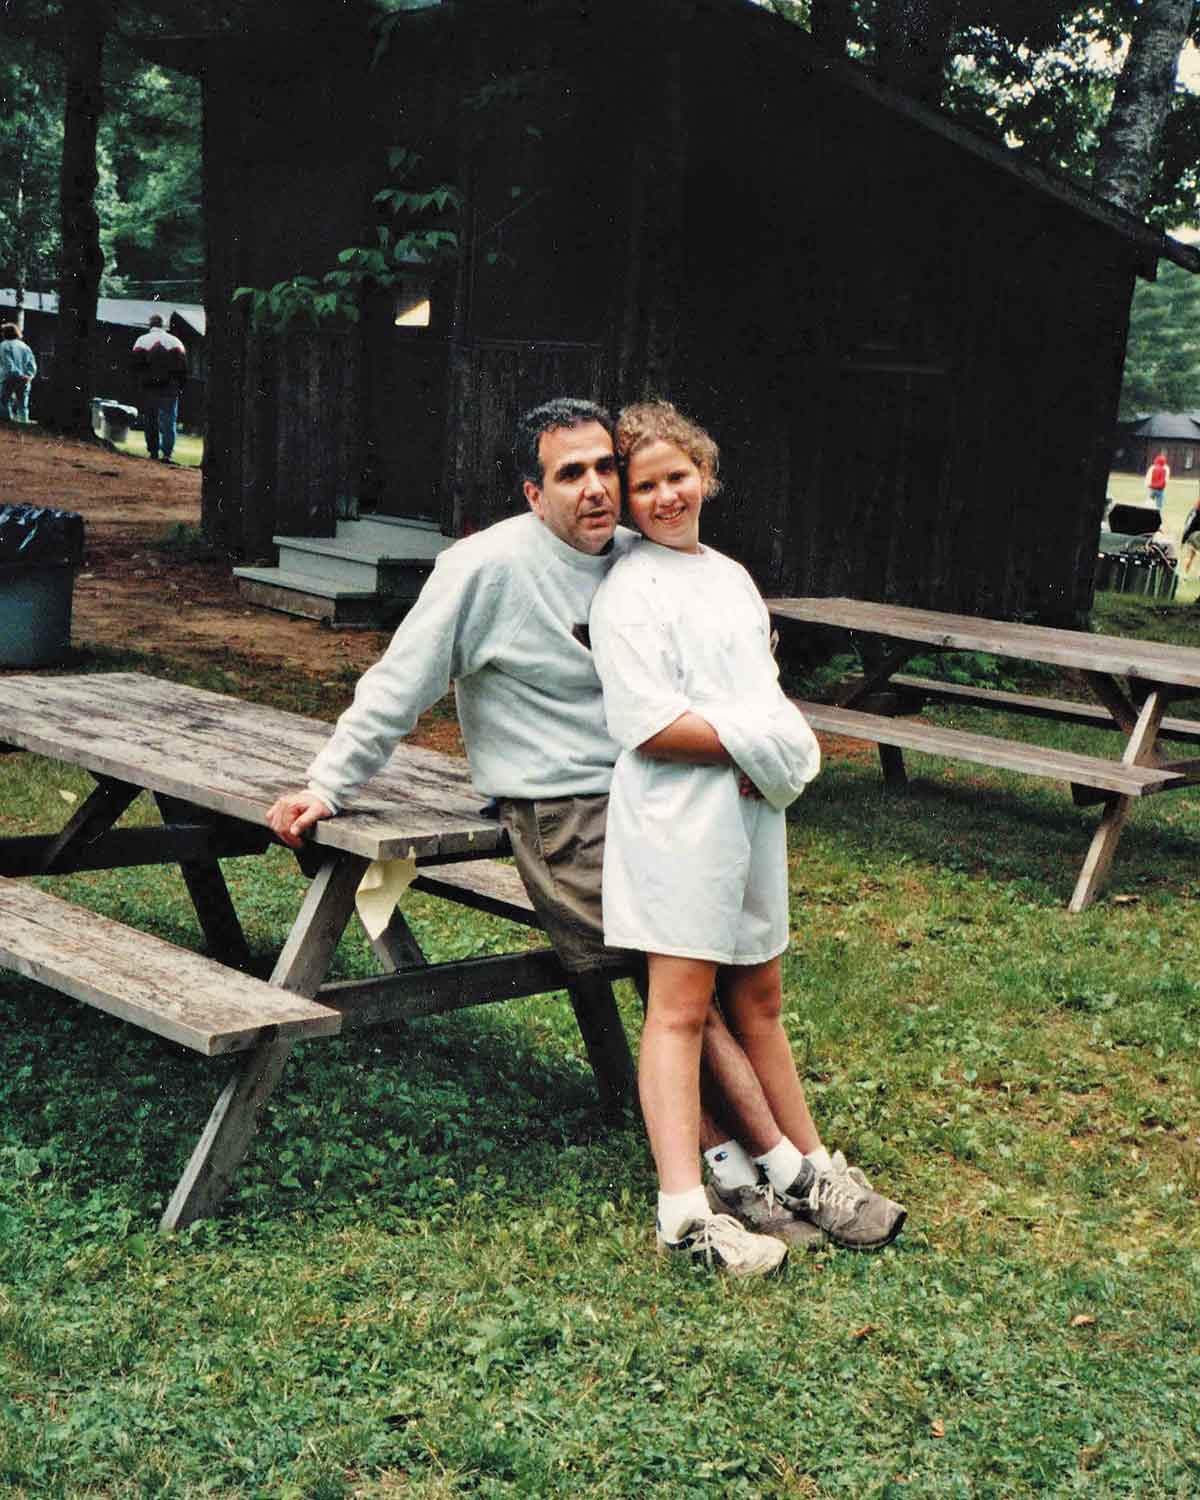 An image of Julia Turshen with her dad for the podcast Ep. 40: Cookbook Author Julia Turshen on Feeding Others